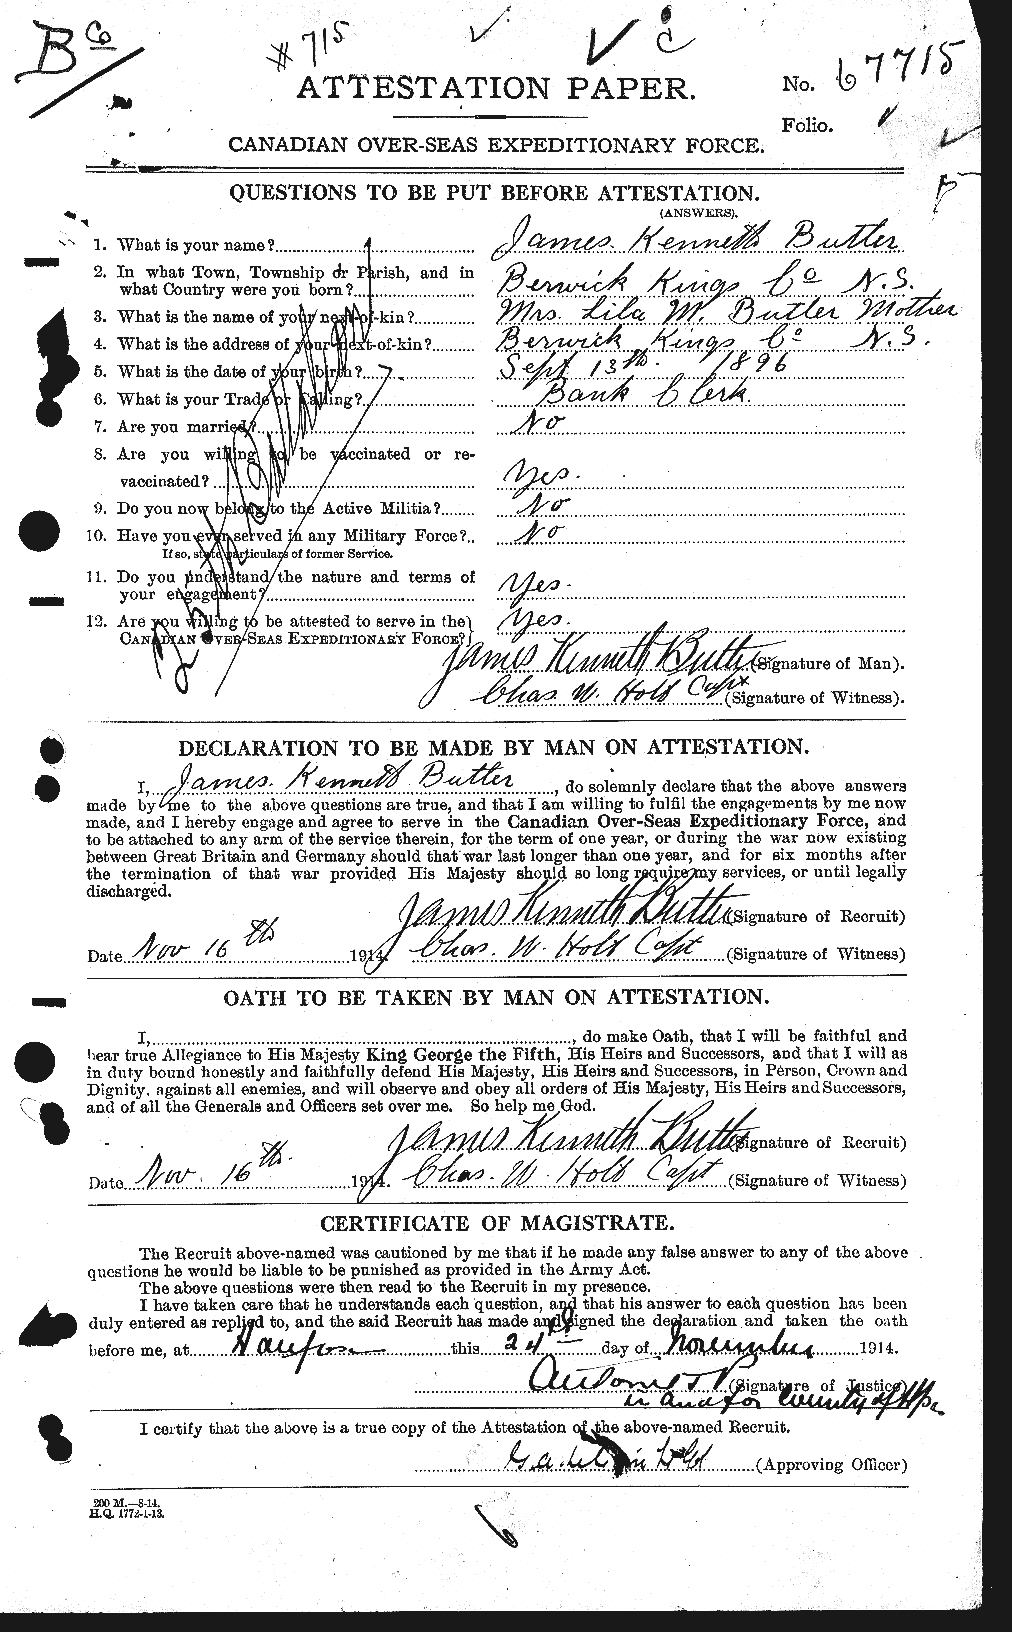 Personnel Records of the First World War - CEF 276002a